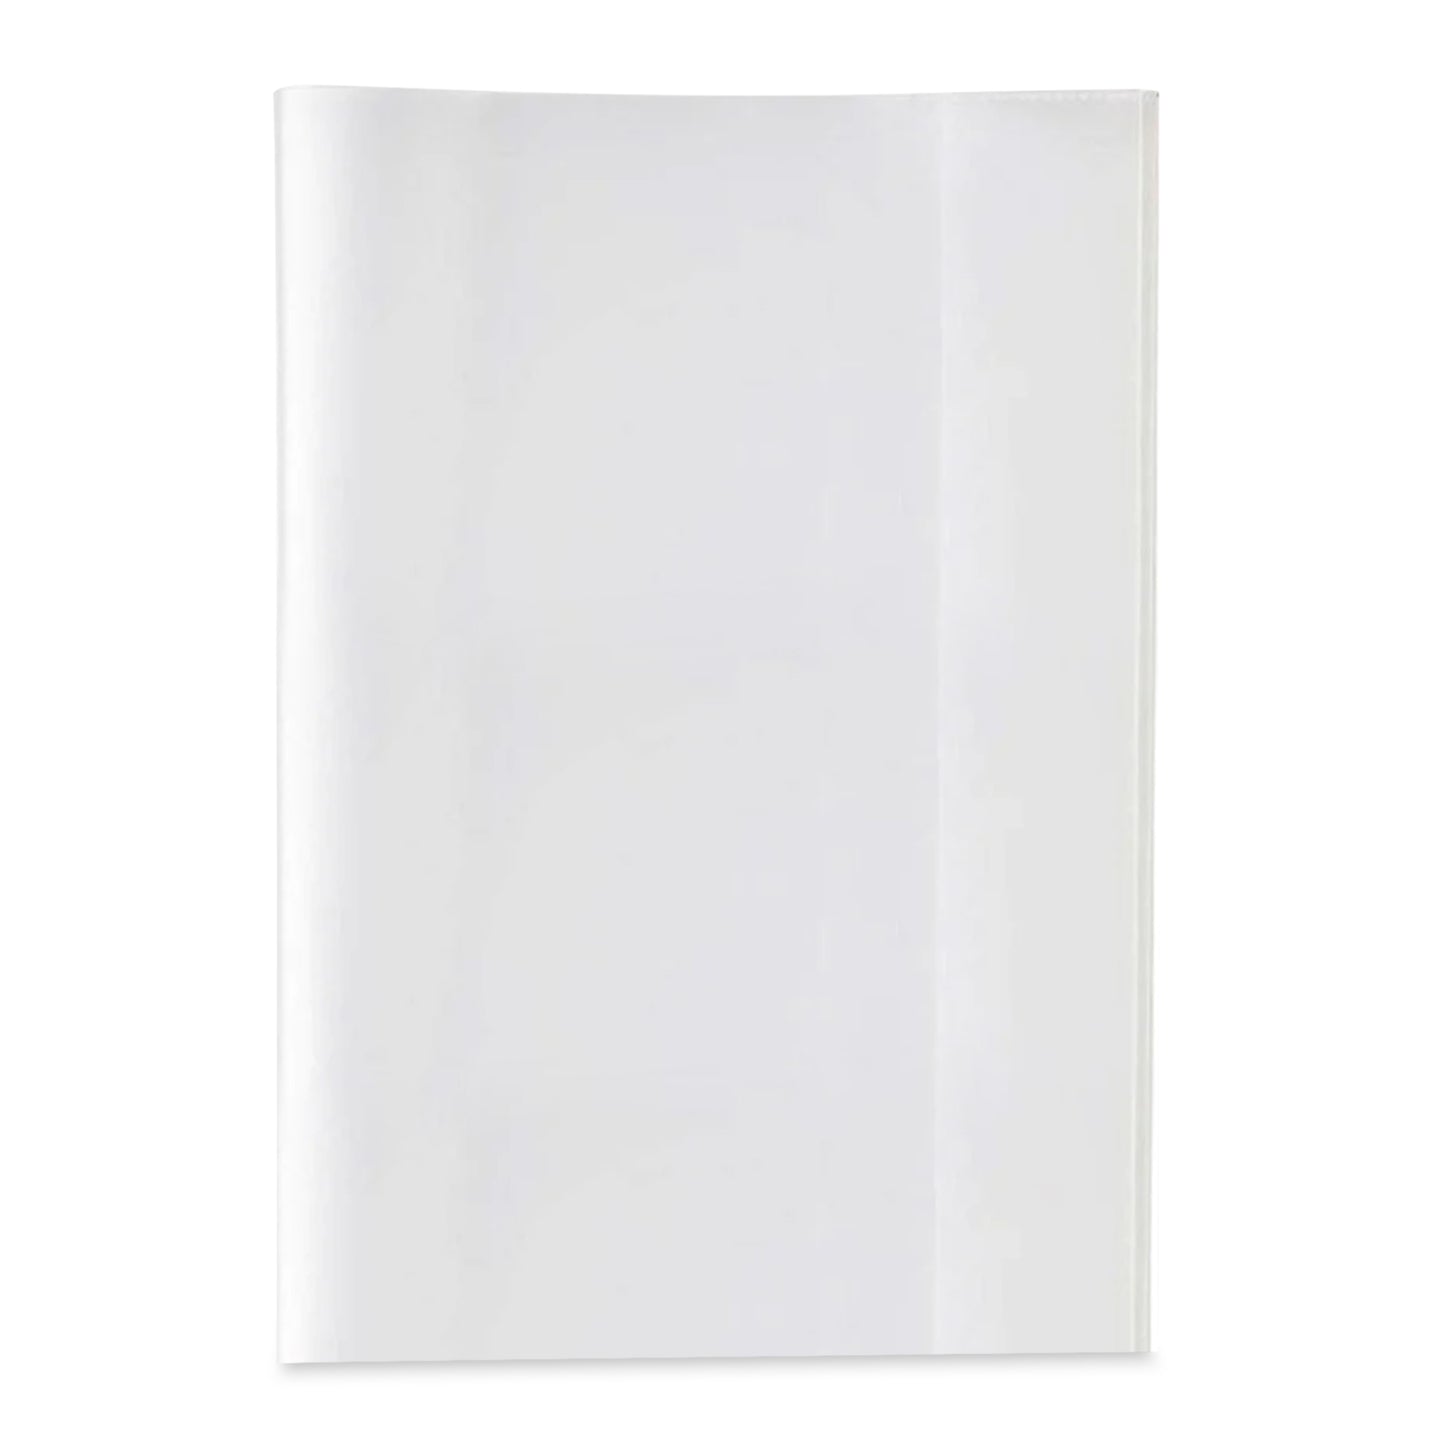 Pack of 10 9x7" Clear Exercise Book Covers by Janrax